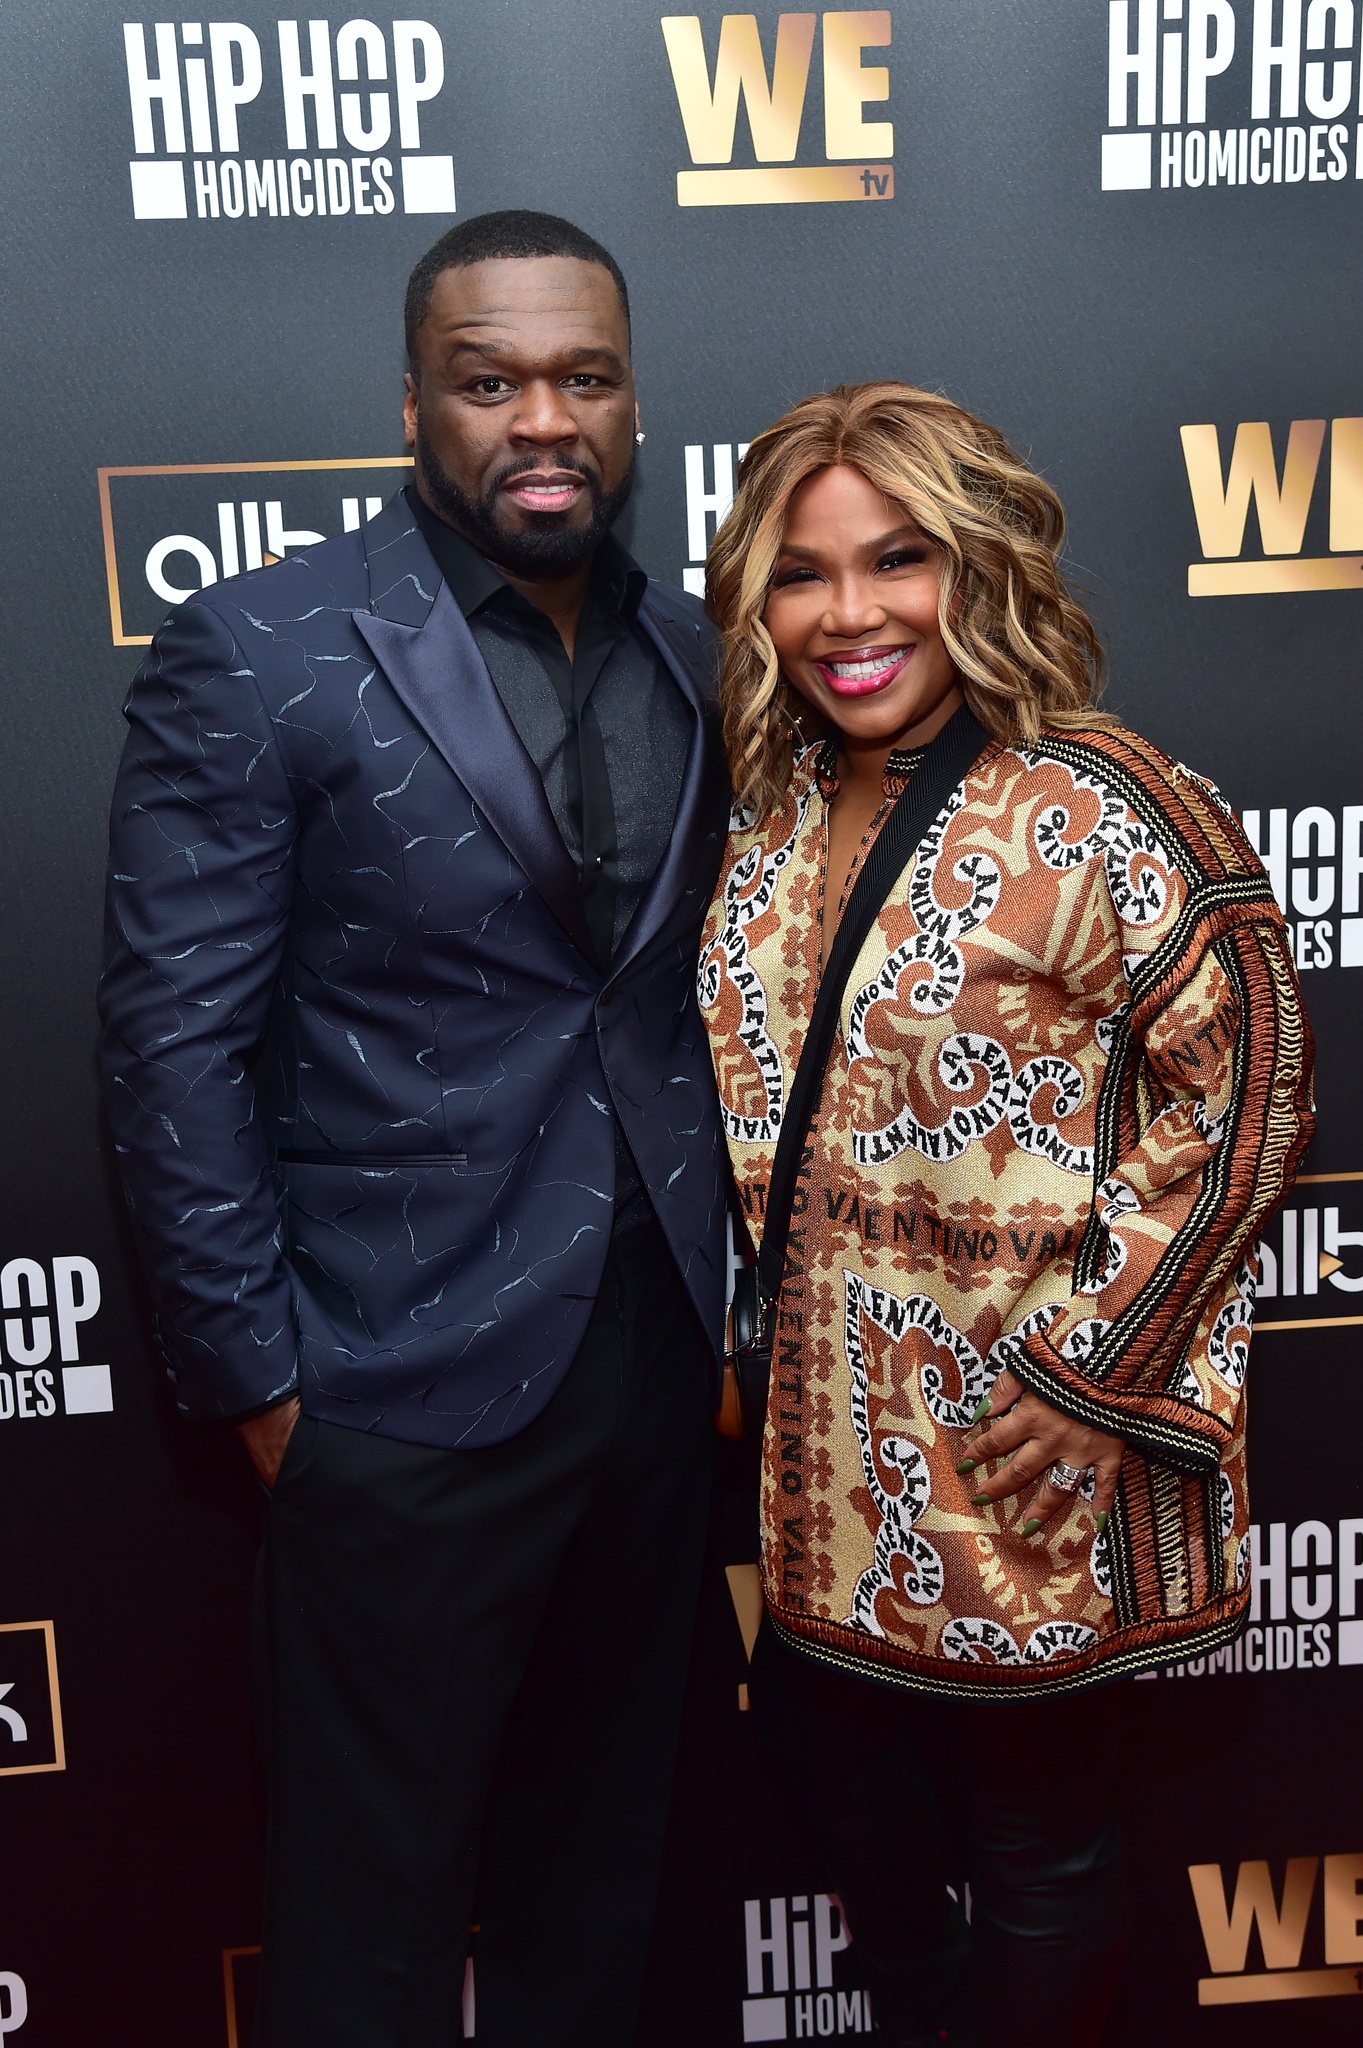 Red Carpet Rundown: WE tv’s ‘Hip Hop Homicides’ Event In NYC